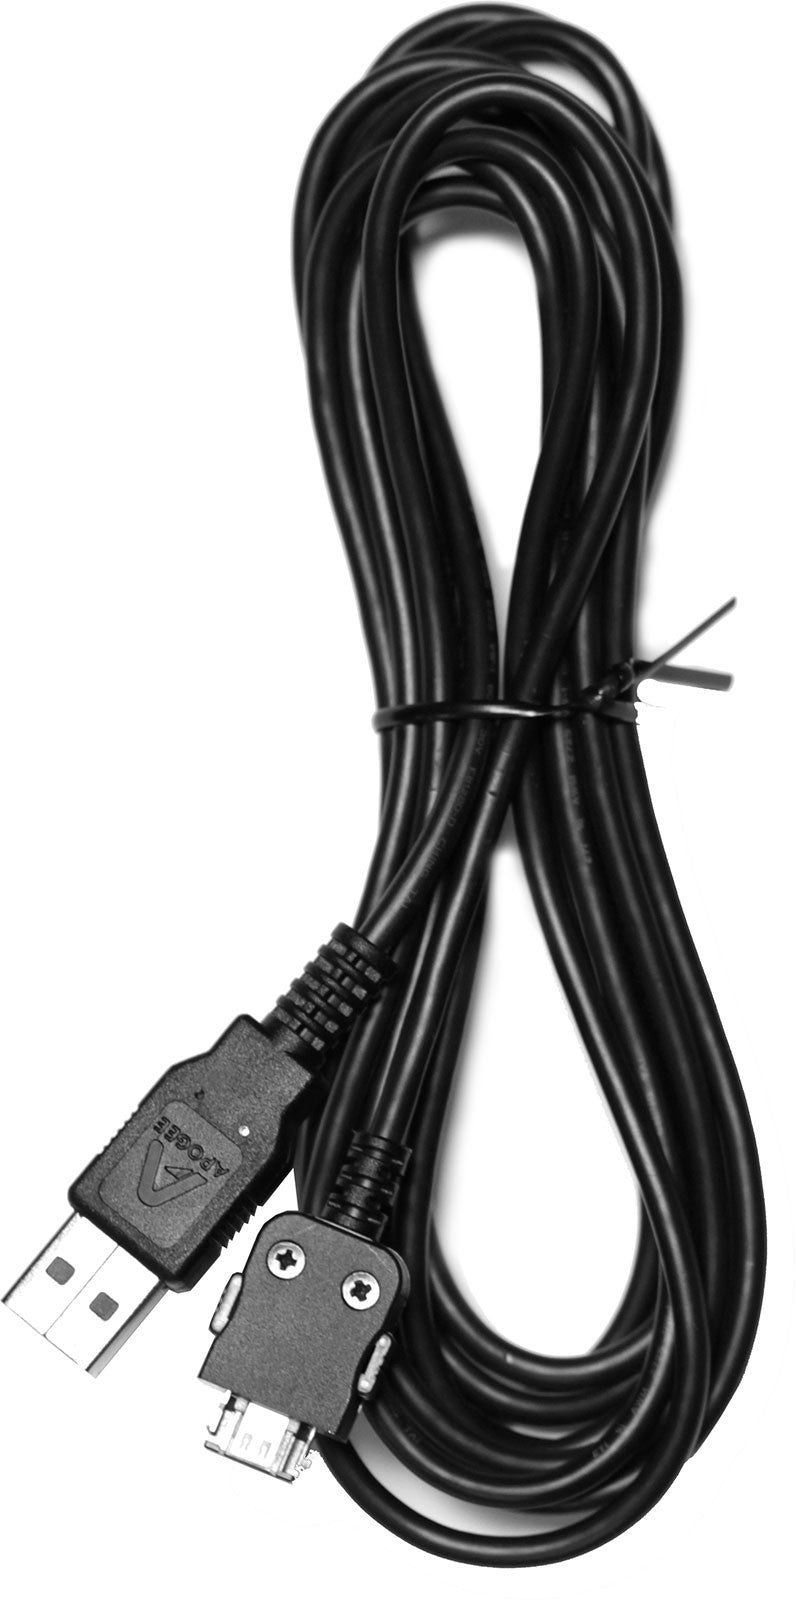 Apogee 3M USB Cable for JAM and MiC